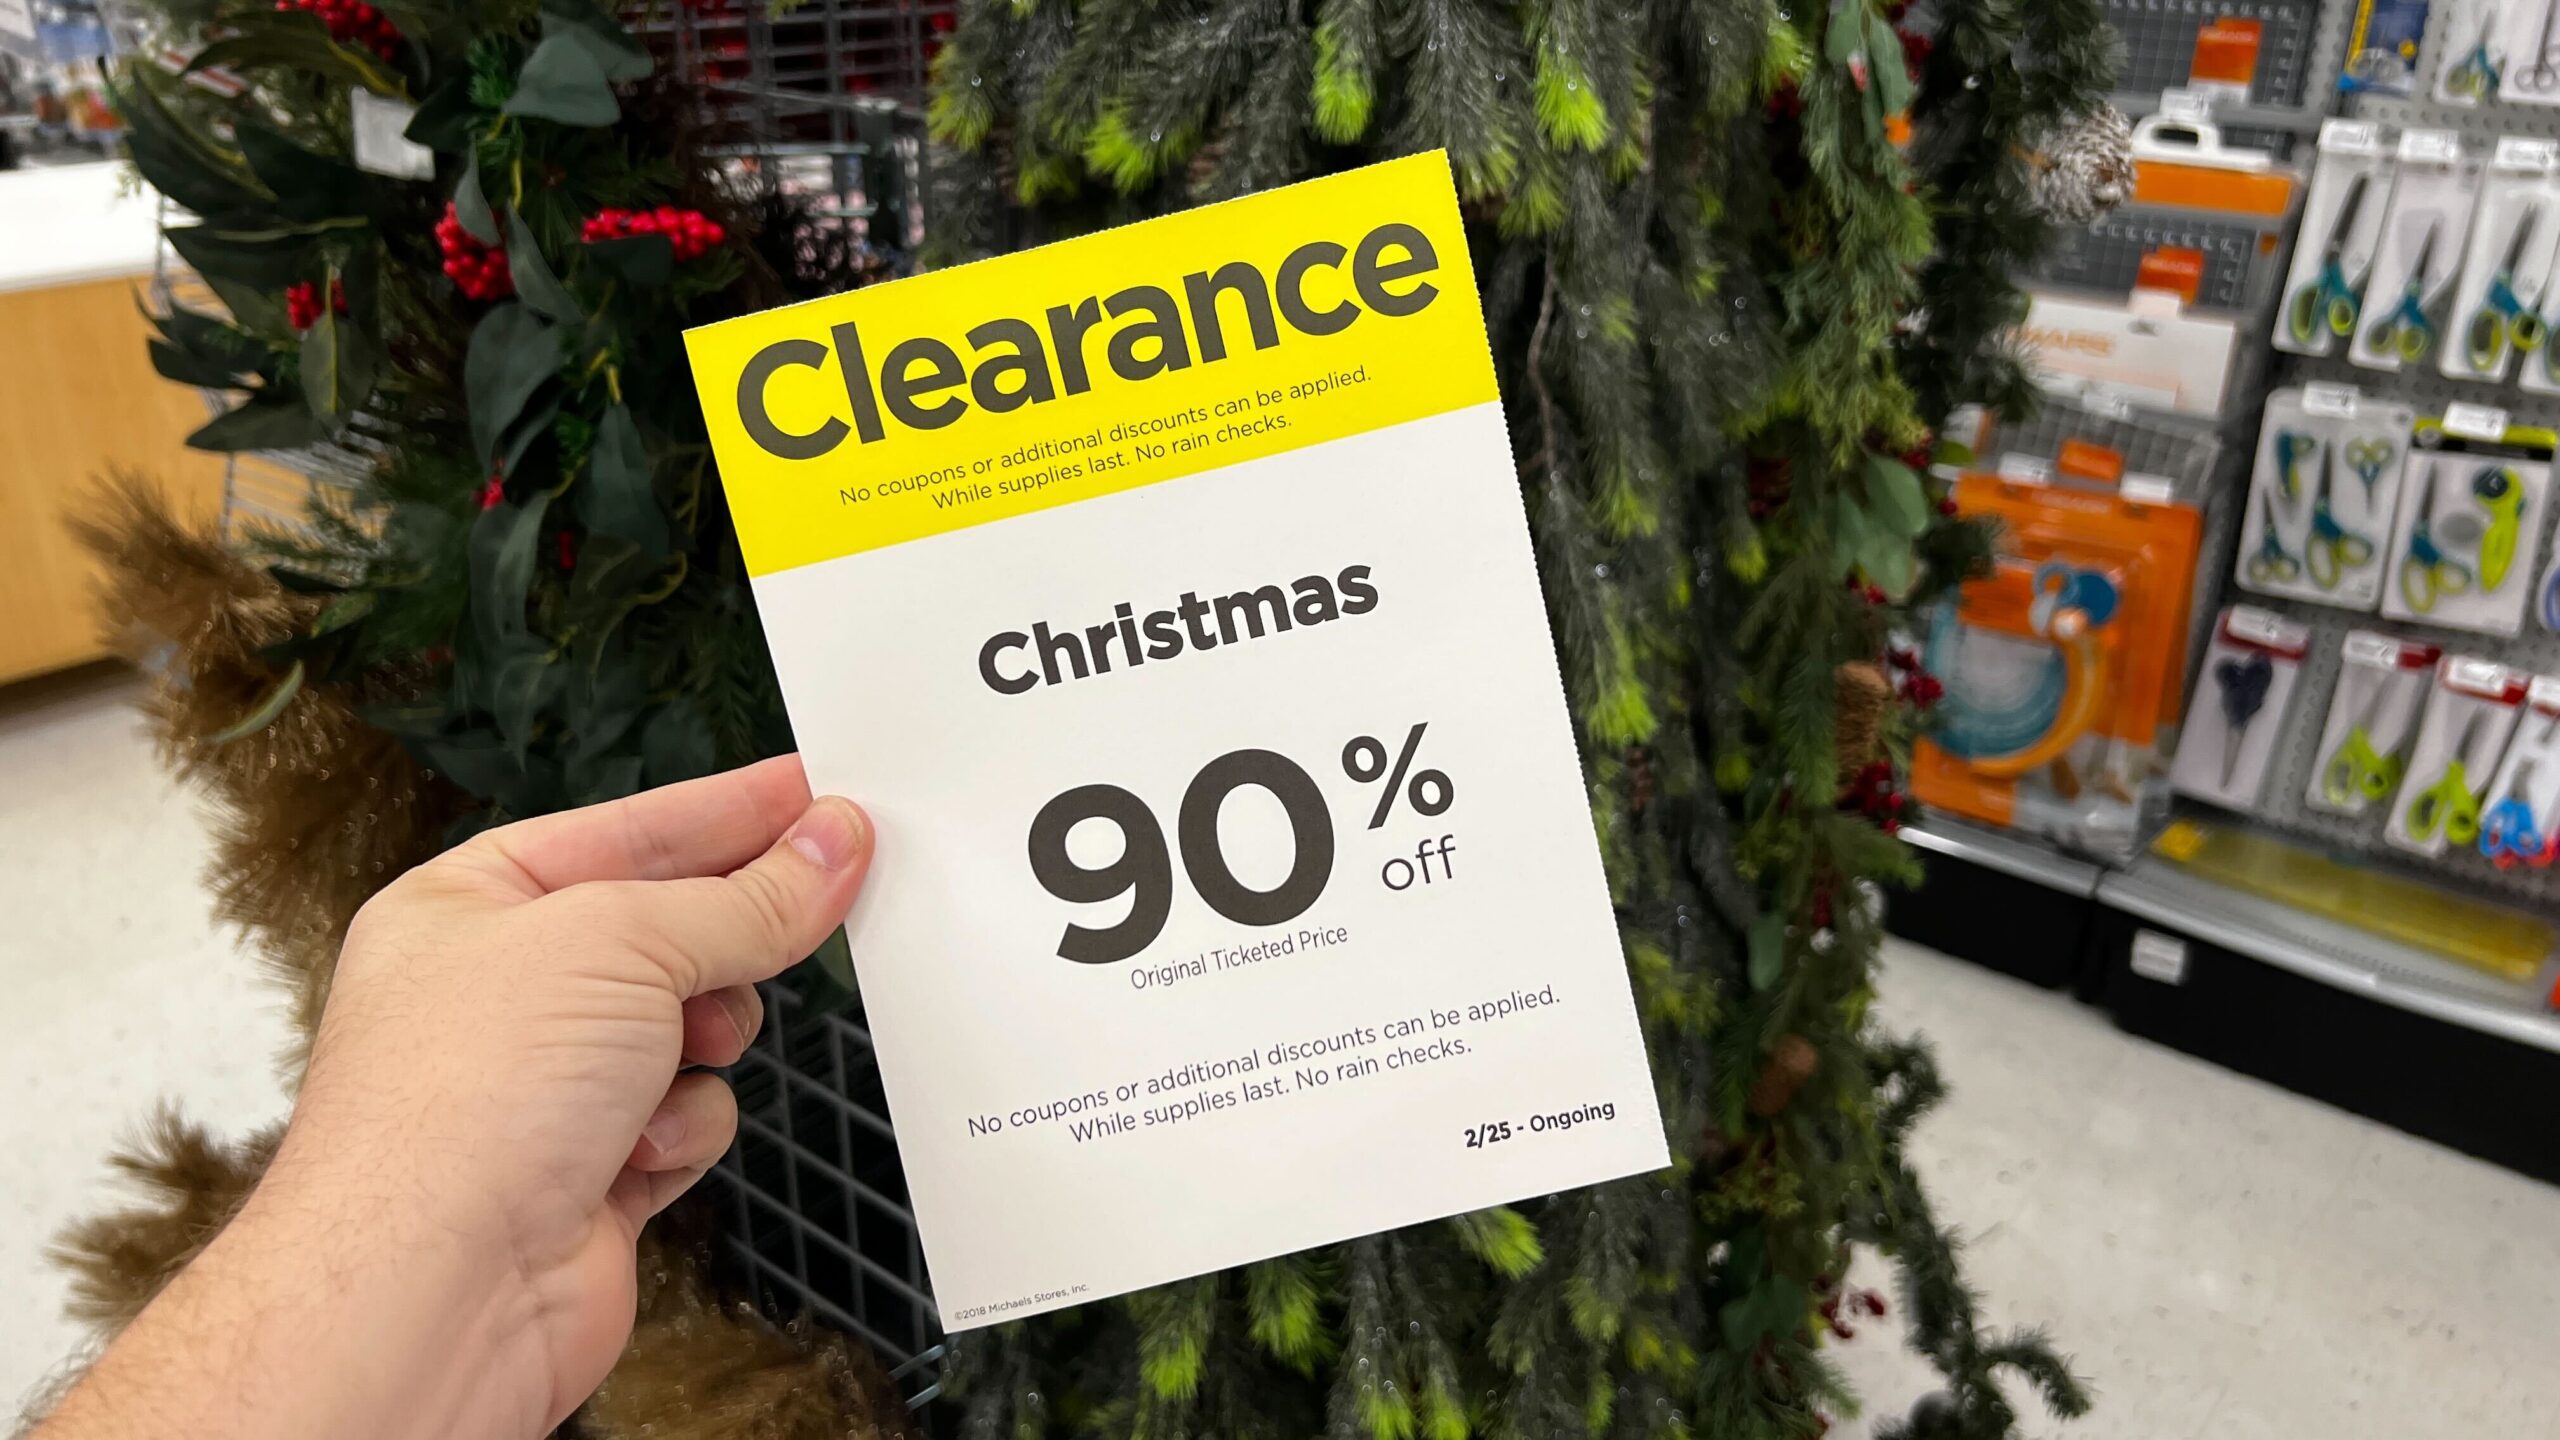 Best Clearance Shopping and Deals - The Freebie Guy: Freebies